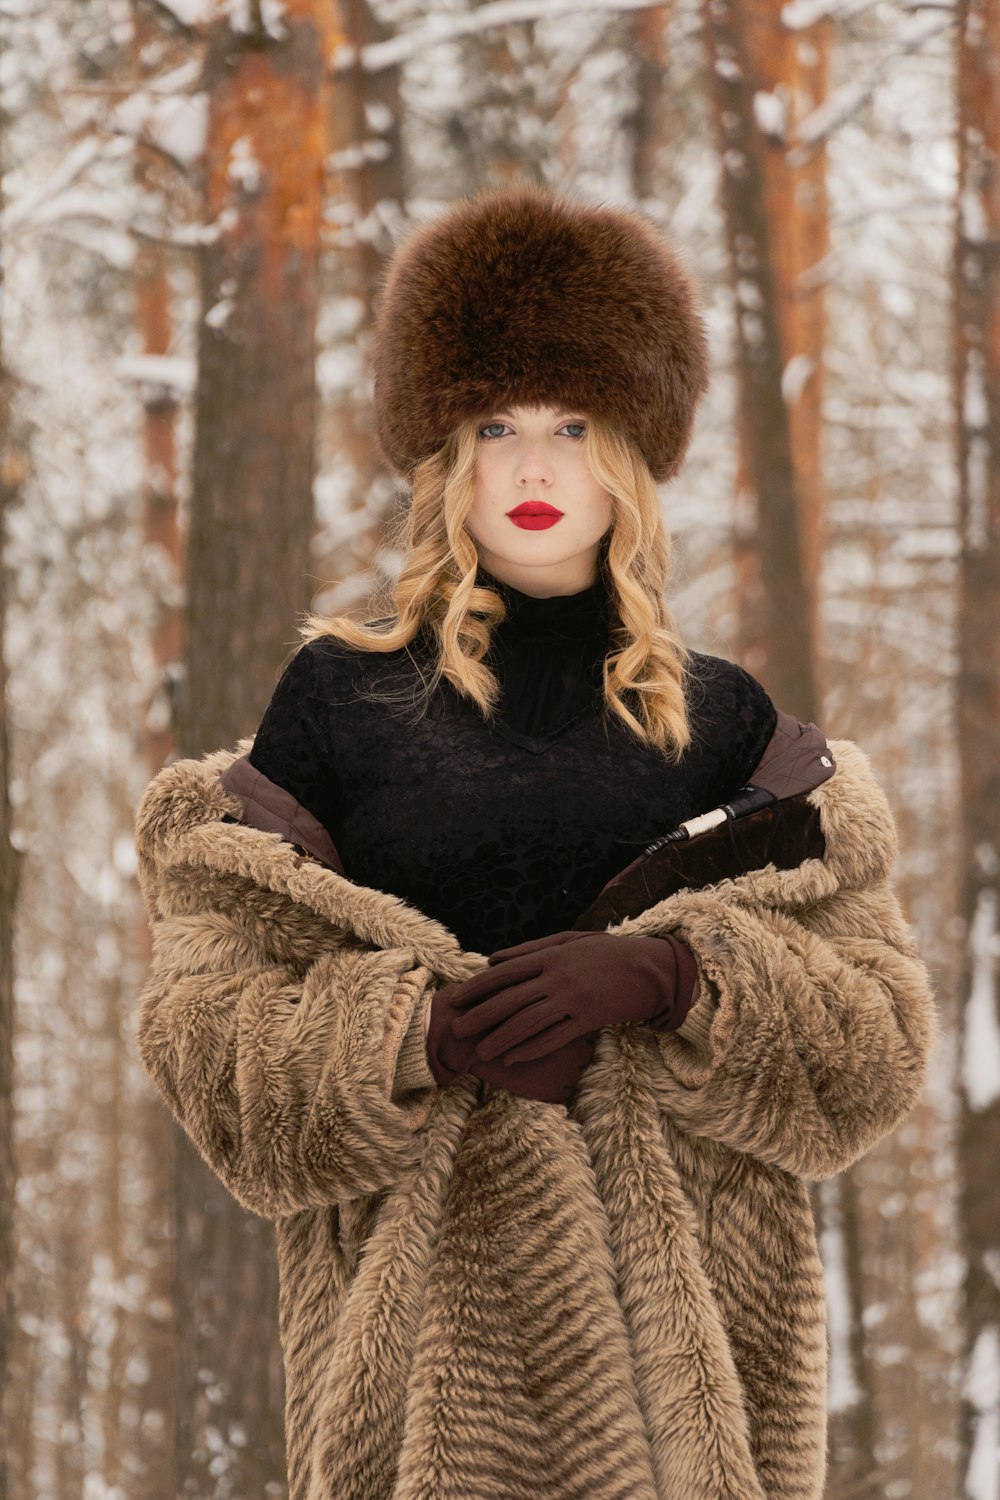 a woman in a fur coat and hat standing in the snow